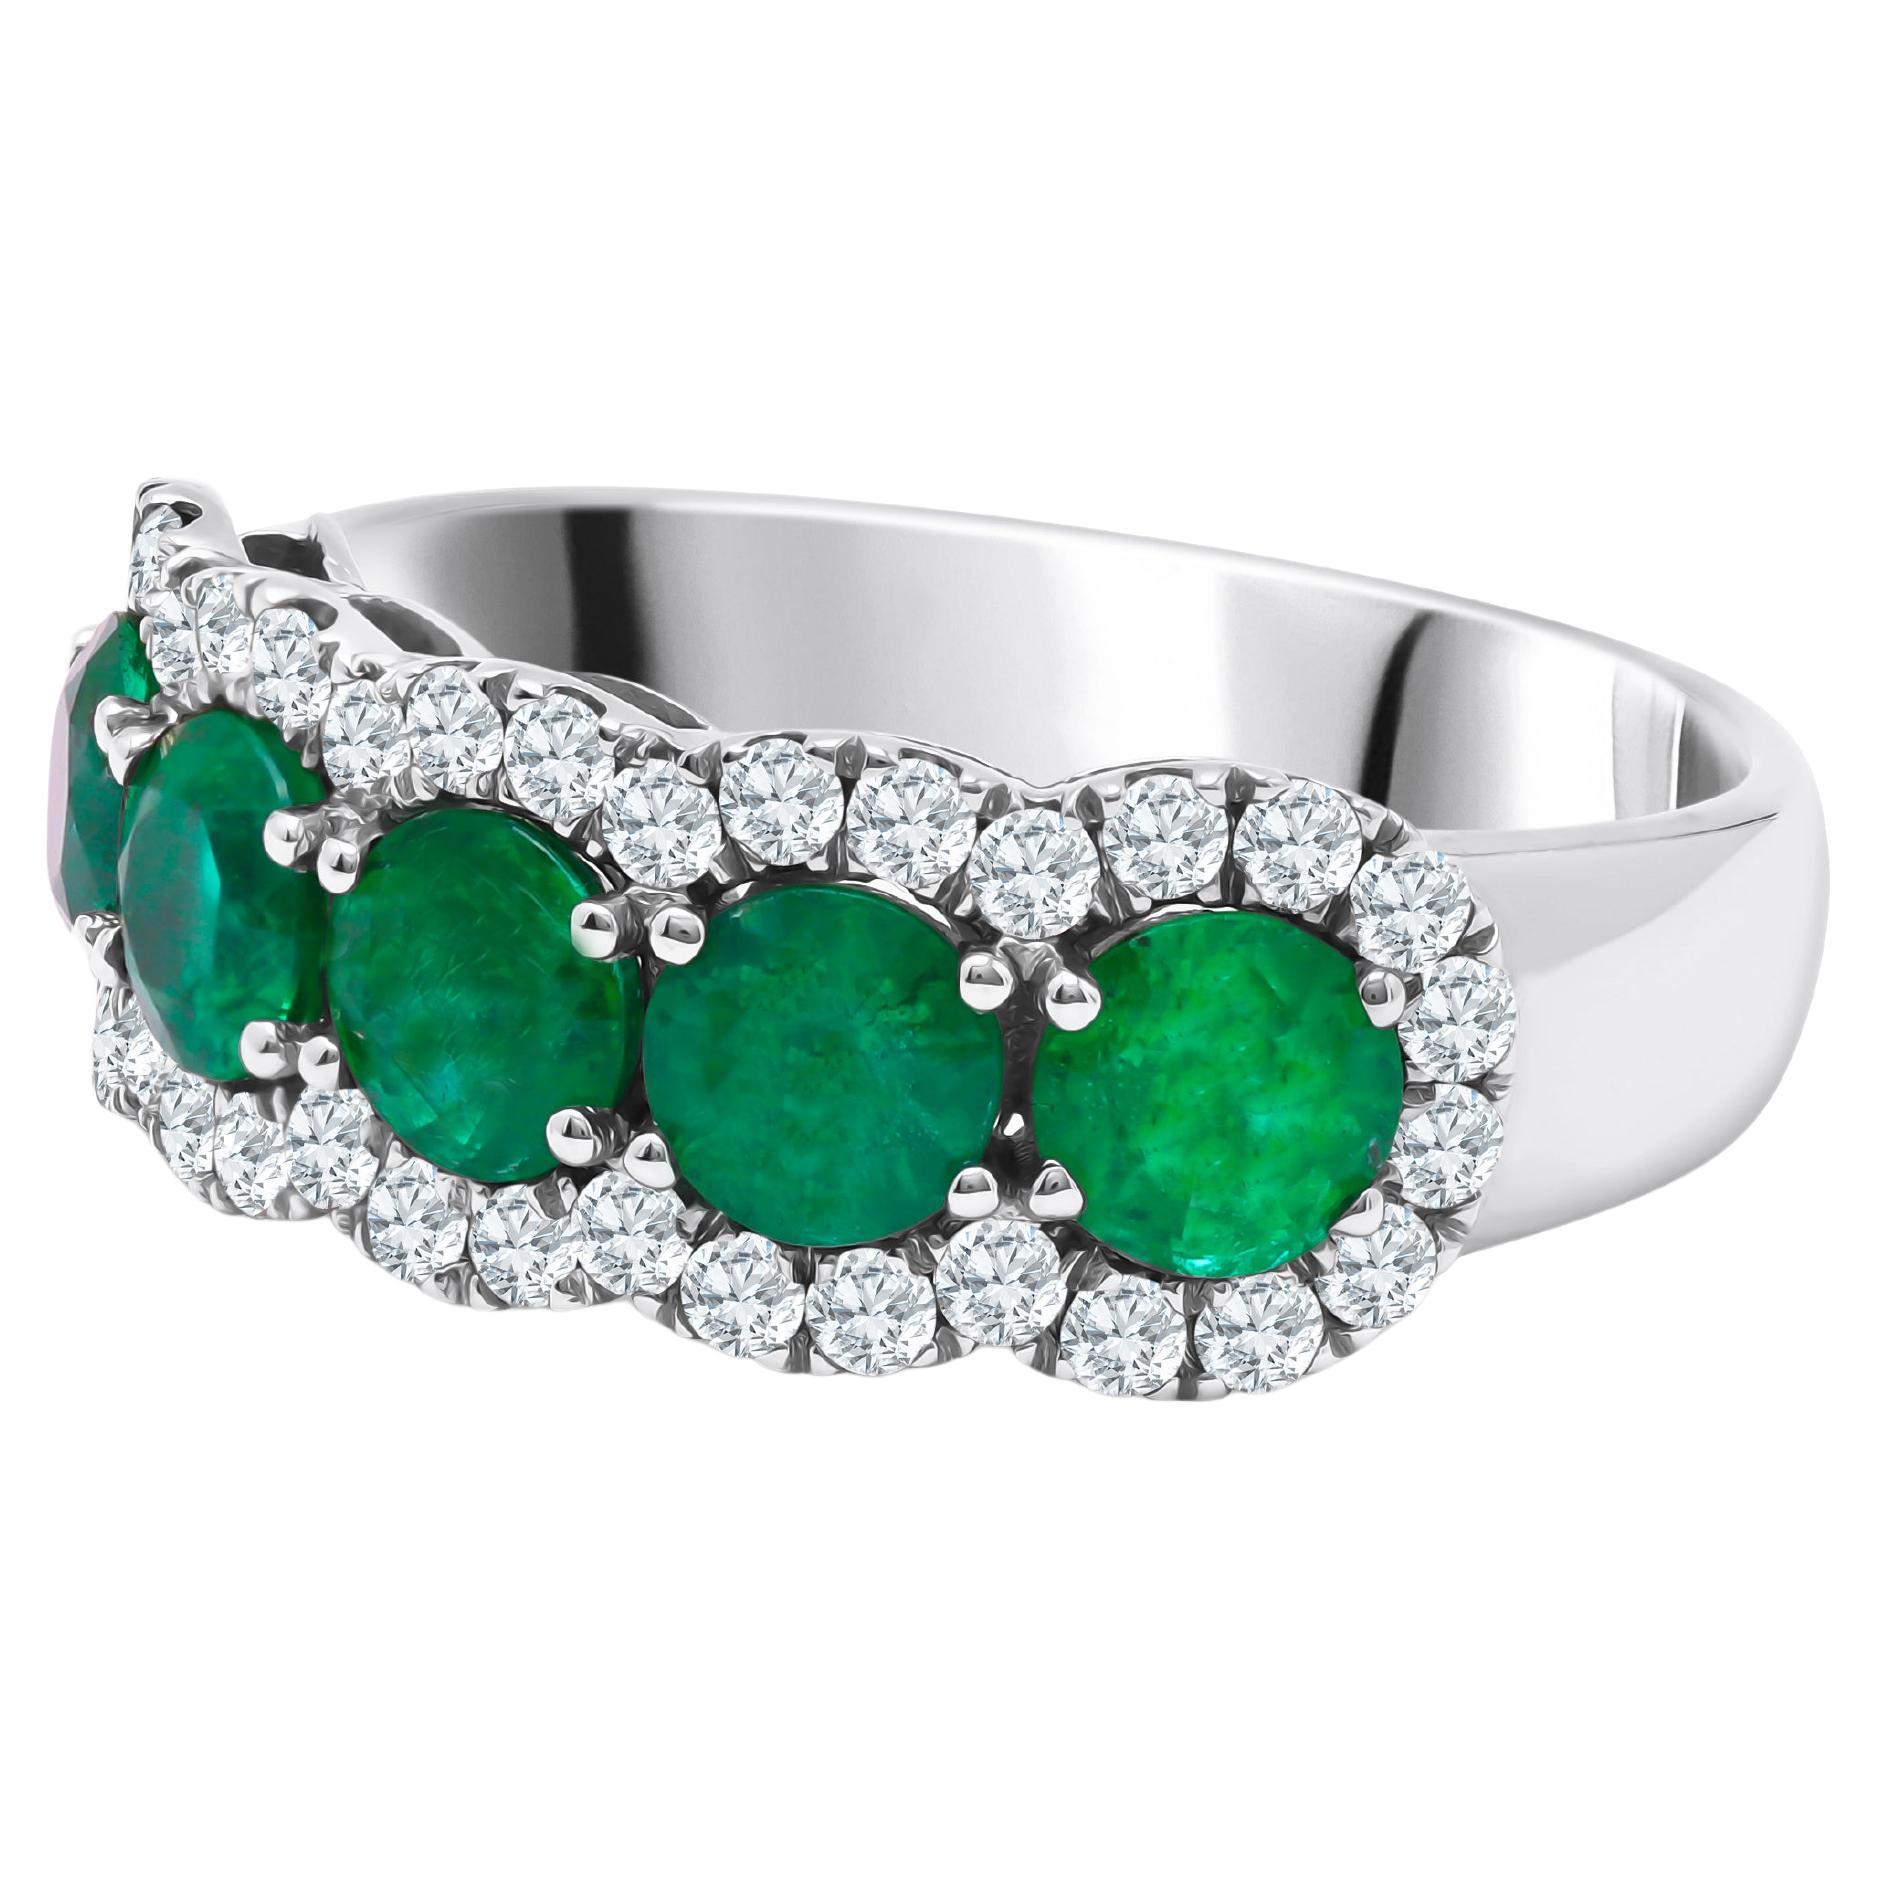 1.79 Carat Emerald Ring with 0.55 Carats Diamond in 18k White Gold ref1505 For Sale